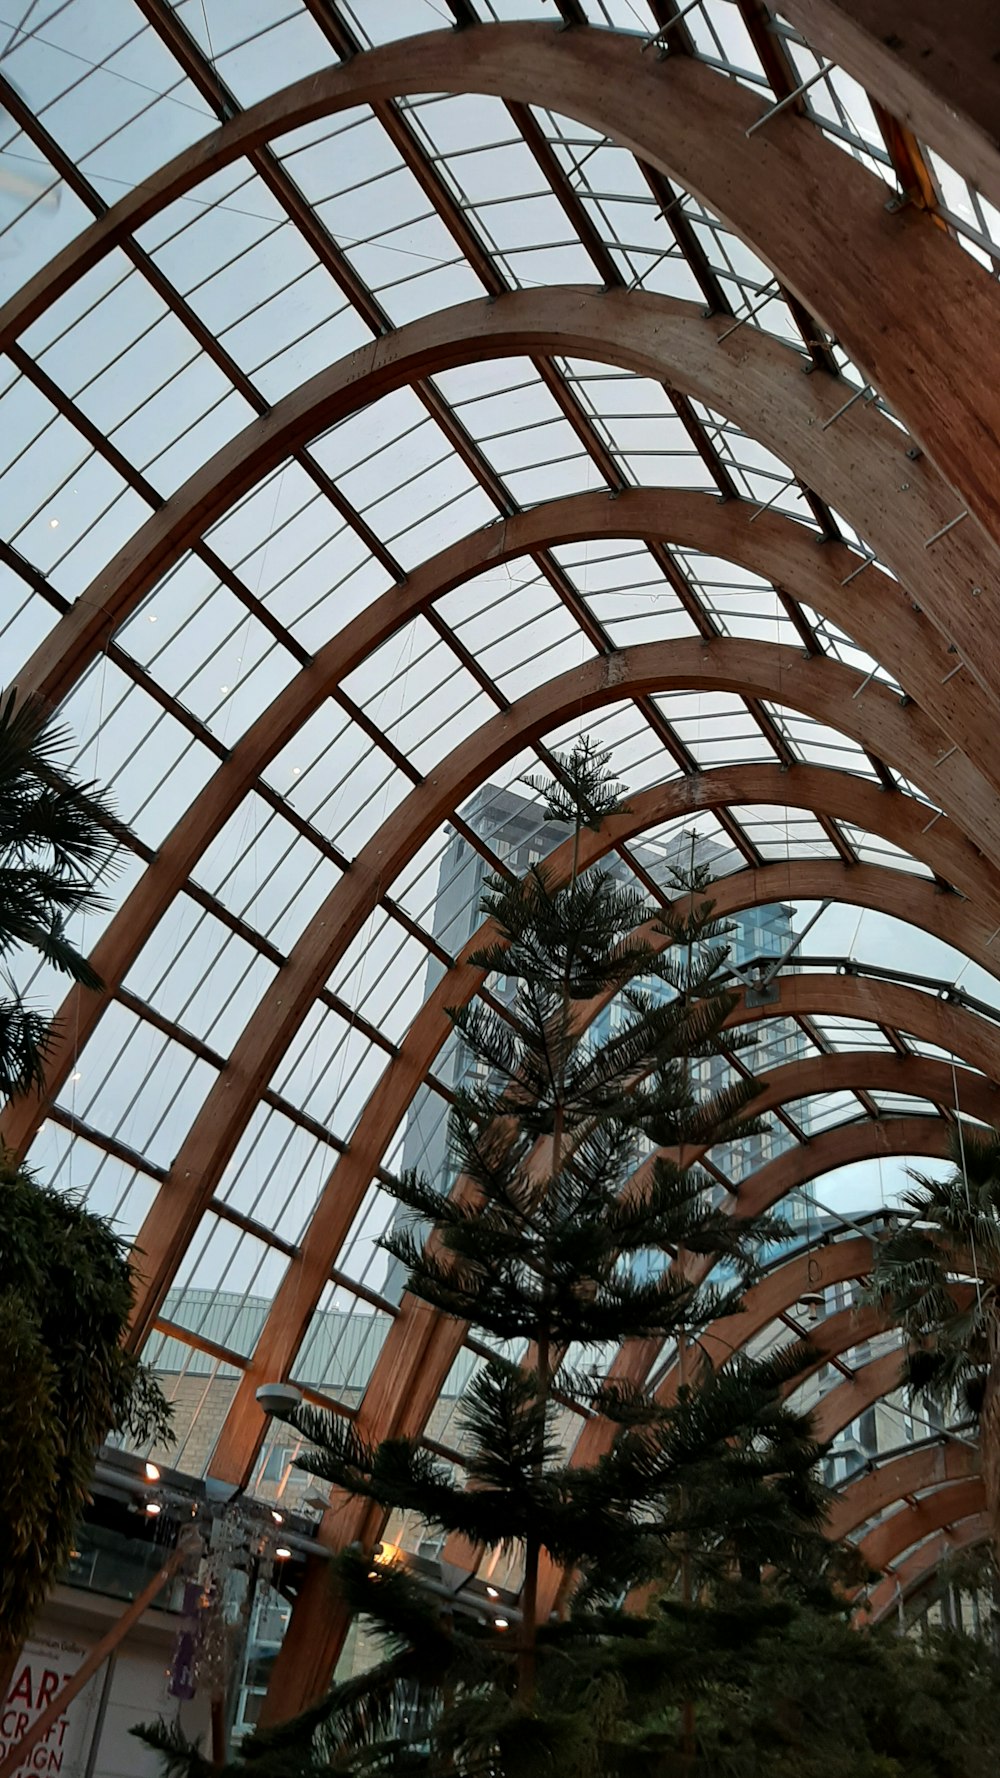 a large wooden structure with a glass roof